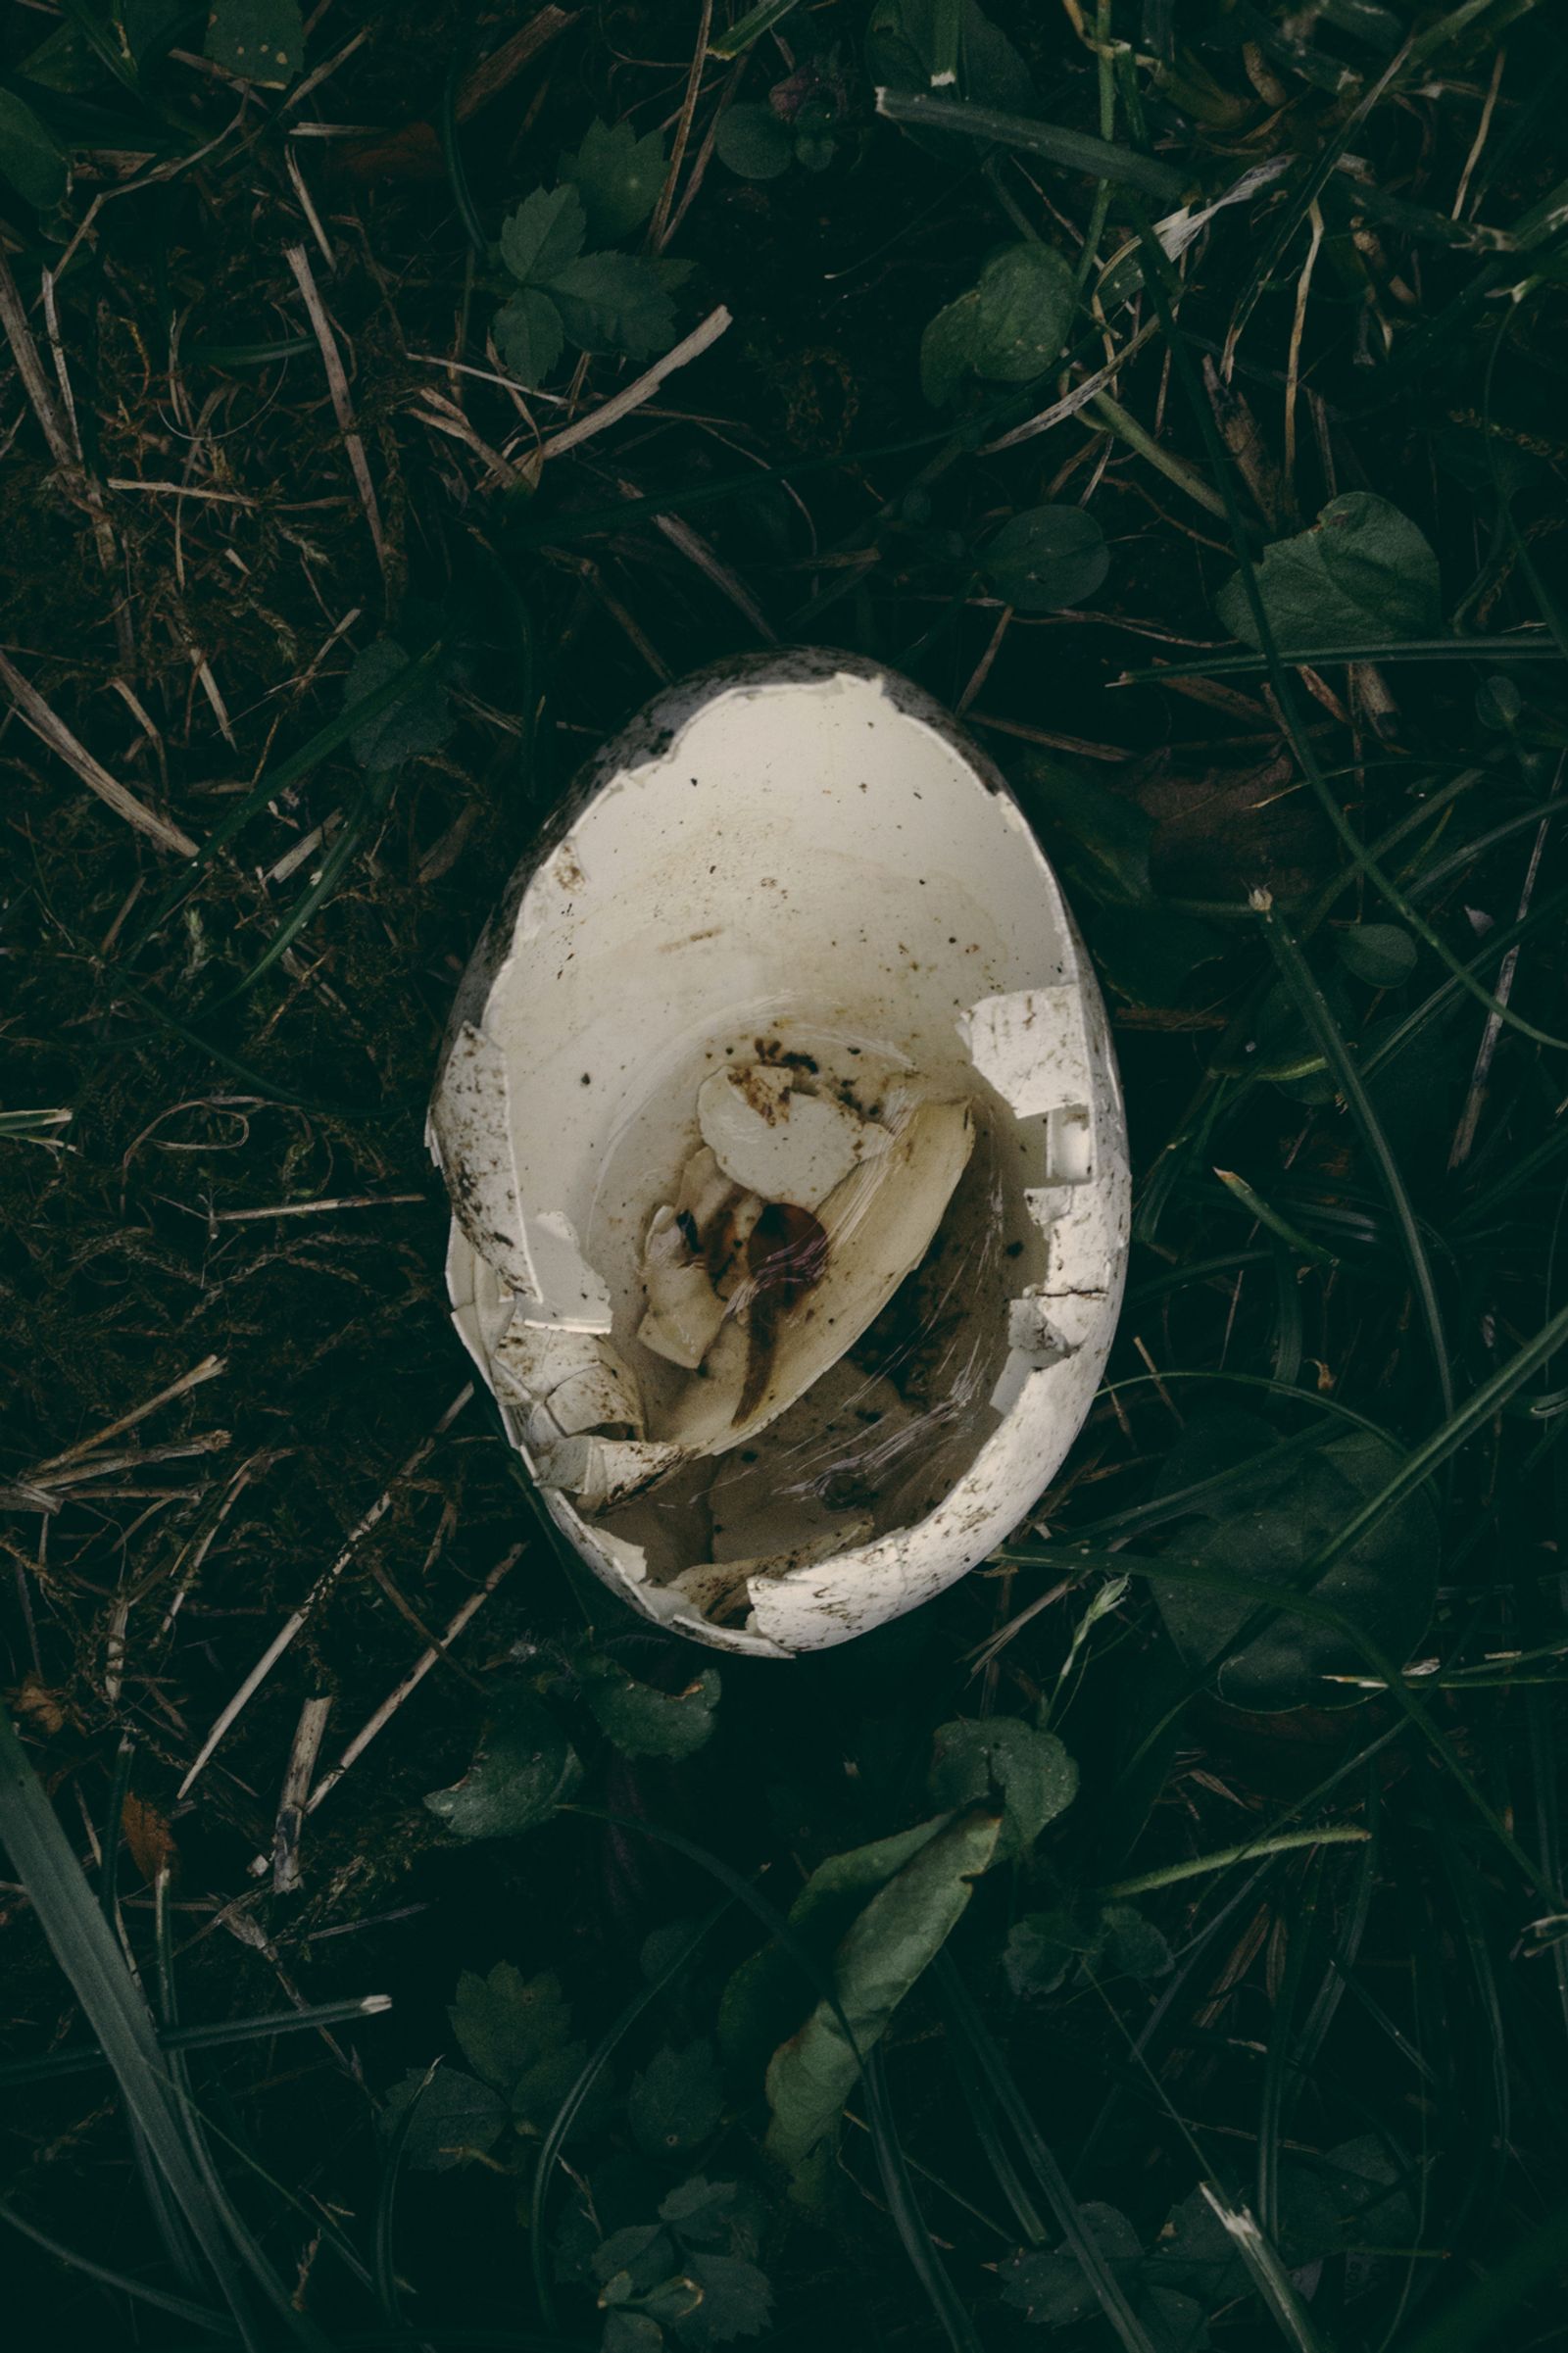 © Francesca Todde - One of Mildred's unfertilized eggs, sometimes happens to fall out of the nest.